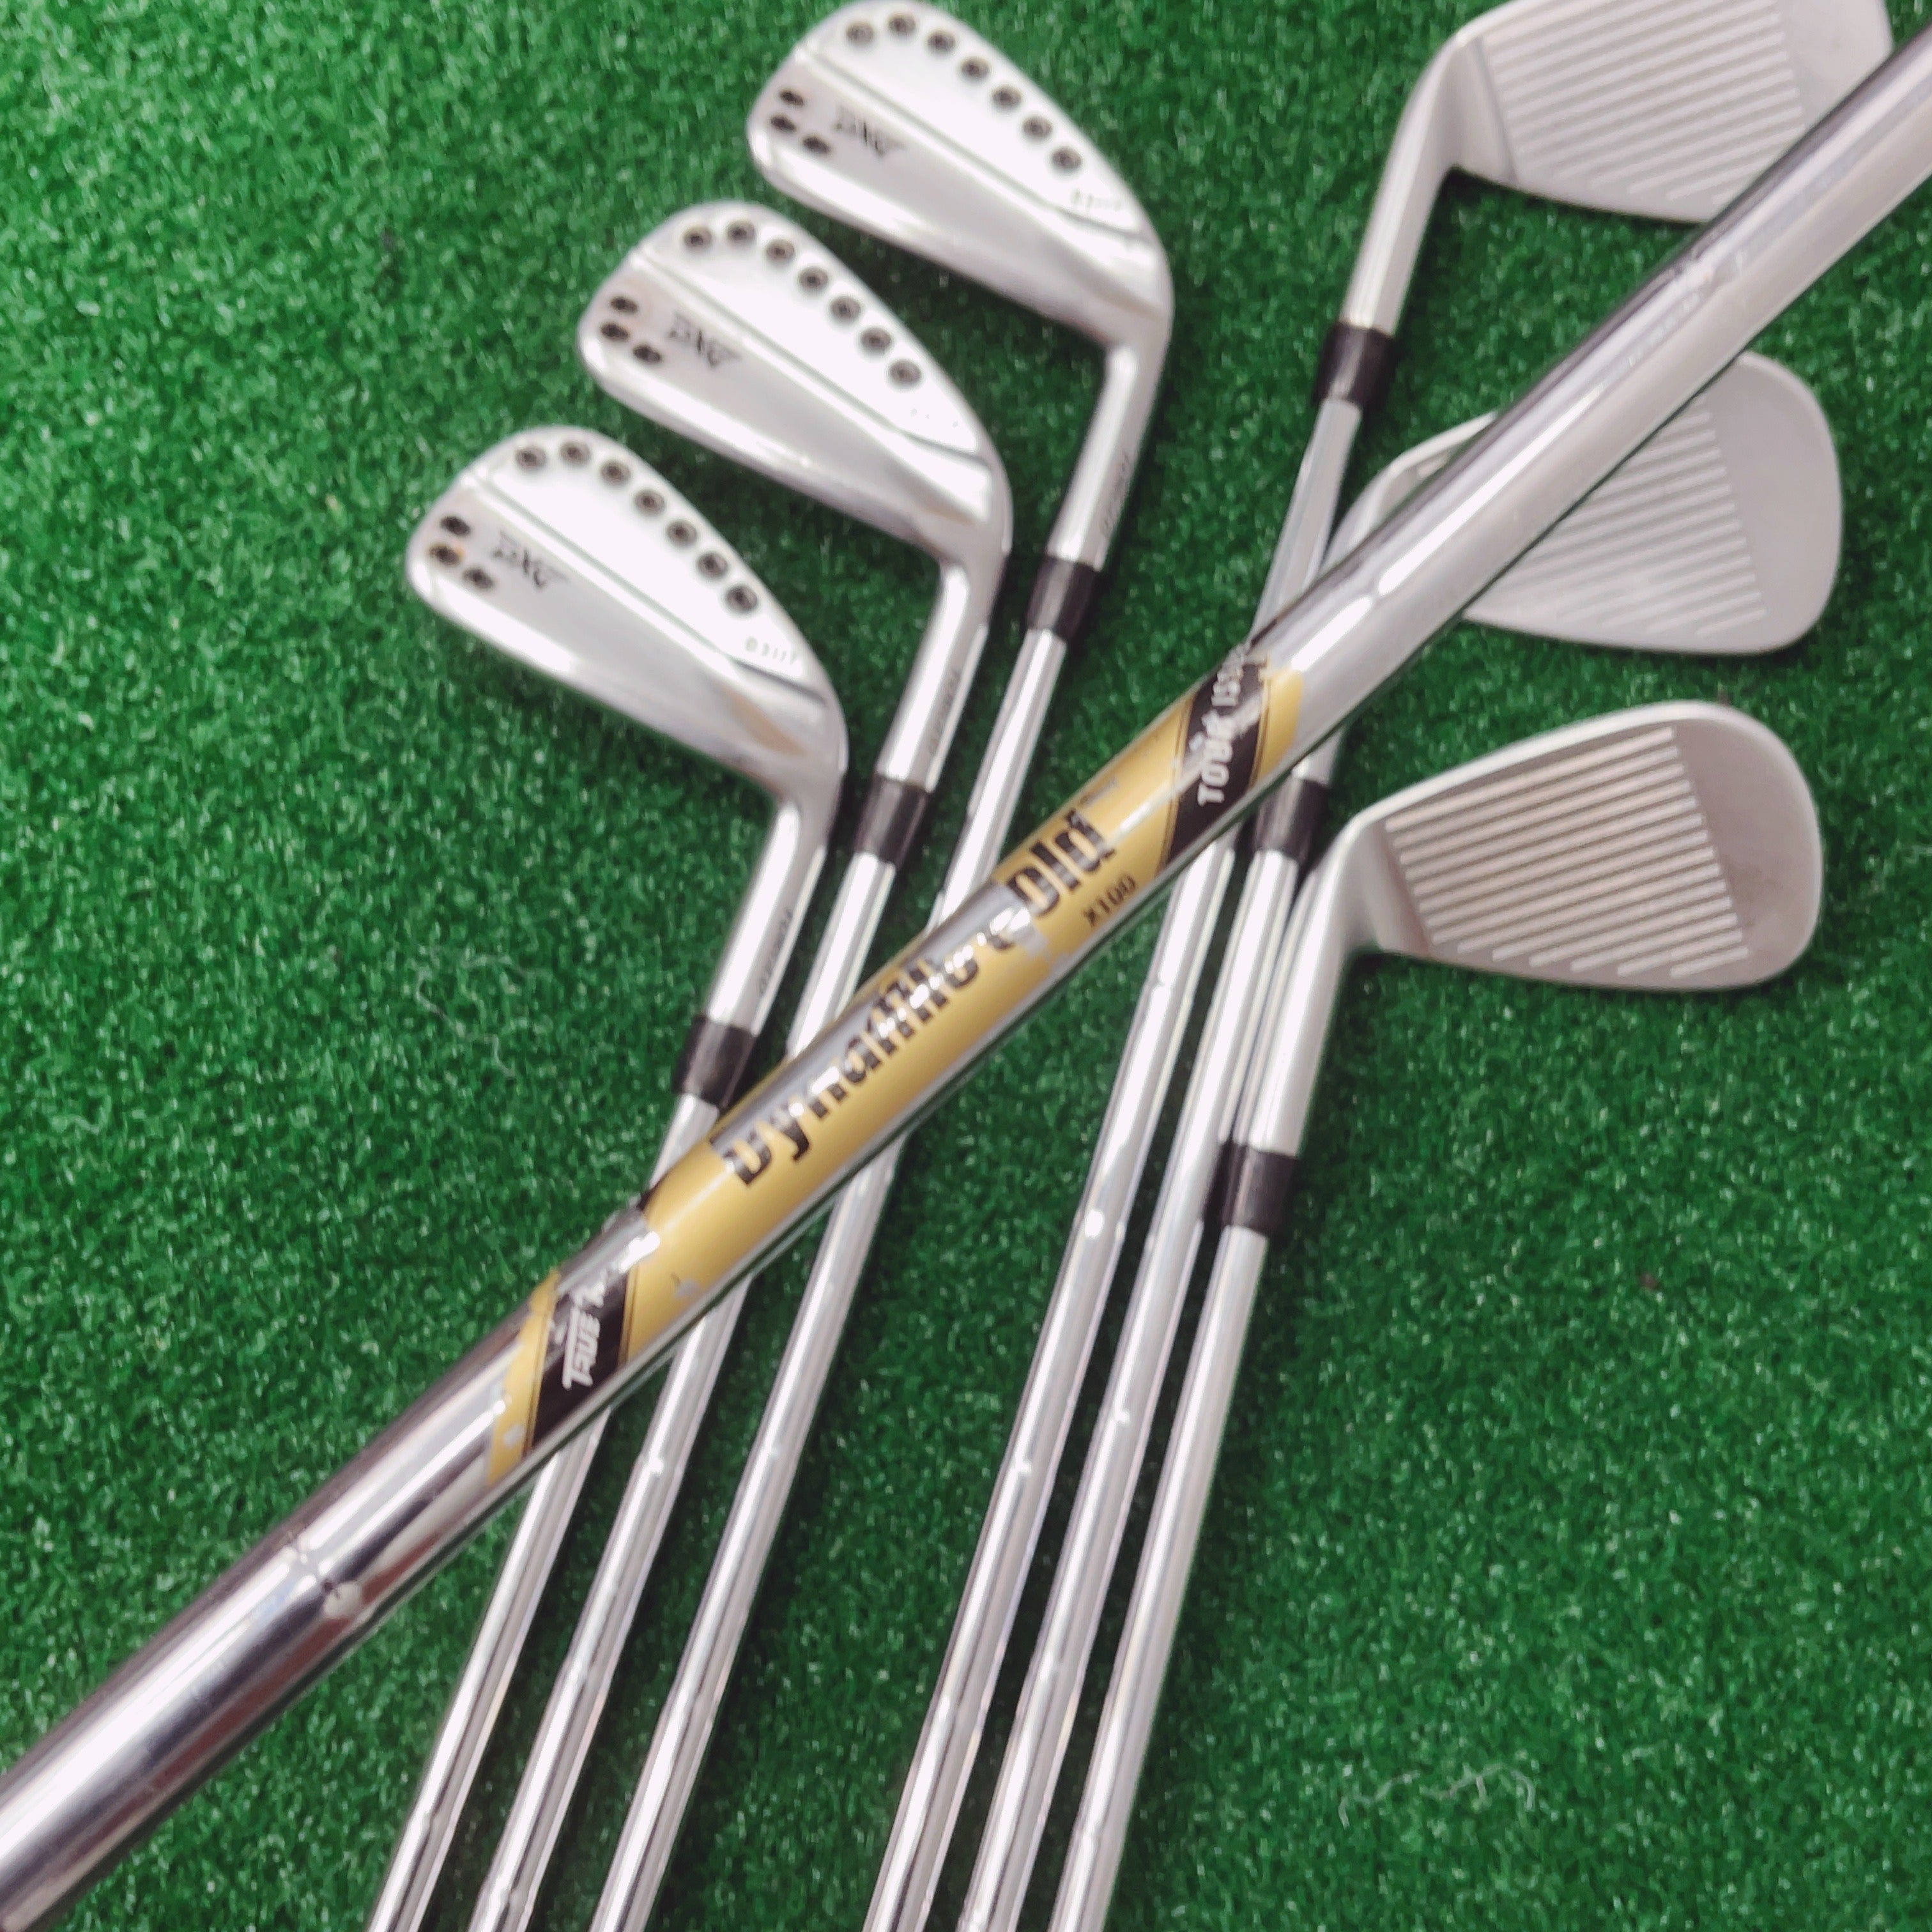 PXG GEN1 O311T IRONS / 4-PW / DYNAMIC GOLD TOUR ISSUE DYNAMIC GOLD X100 SHAFTS